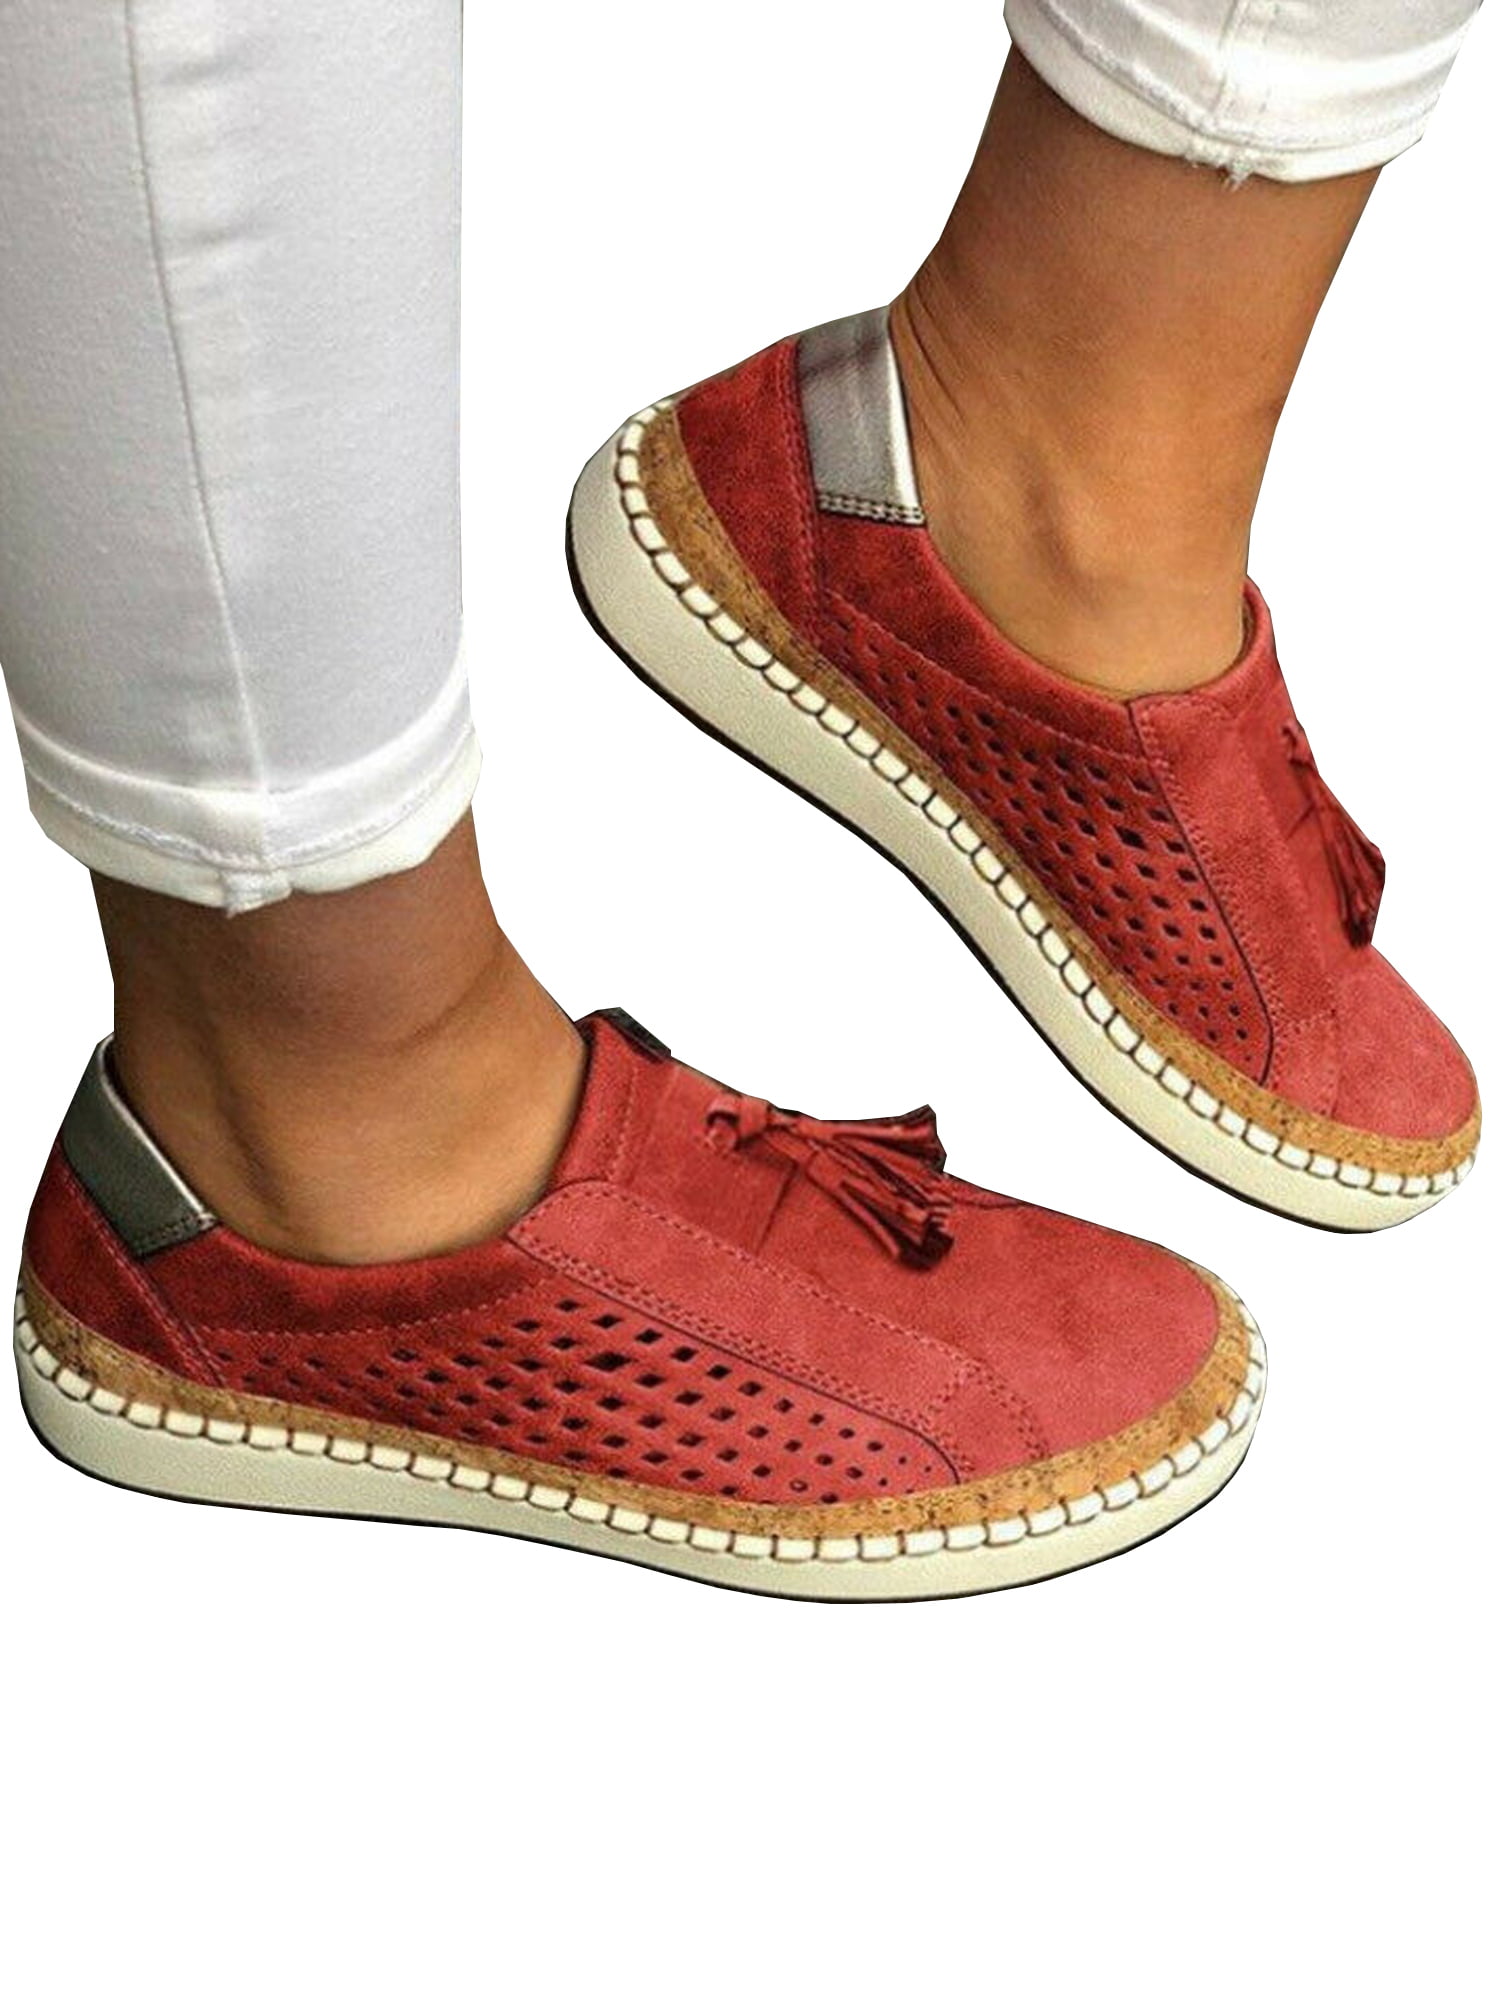 Women Loafers Shoes Flats Summer Fashion Casual Slip On Breathable Sneakers GEMS 